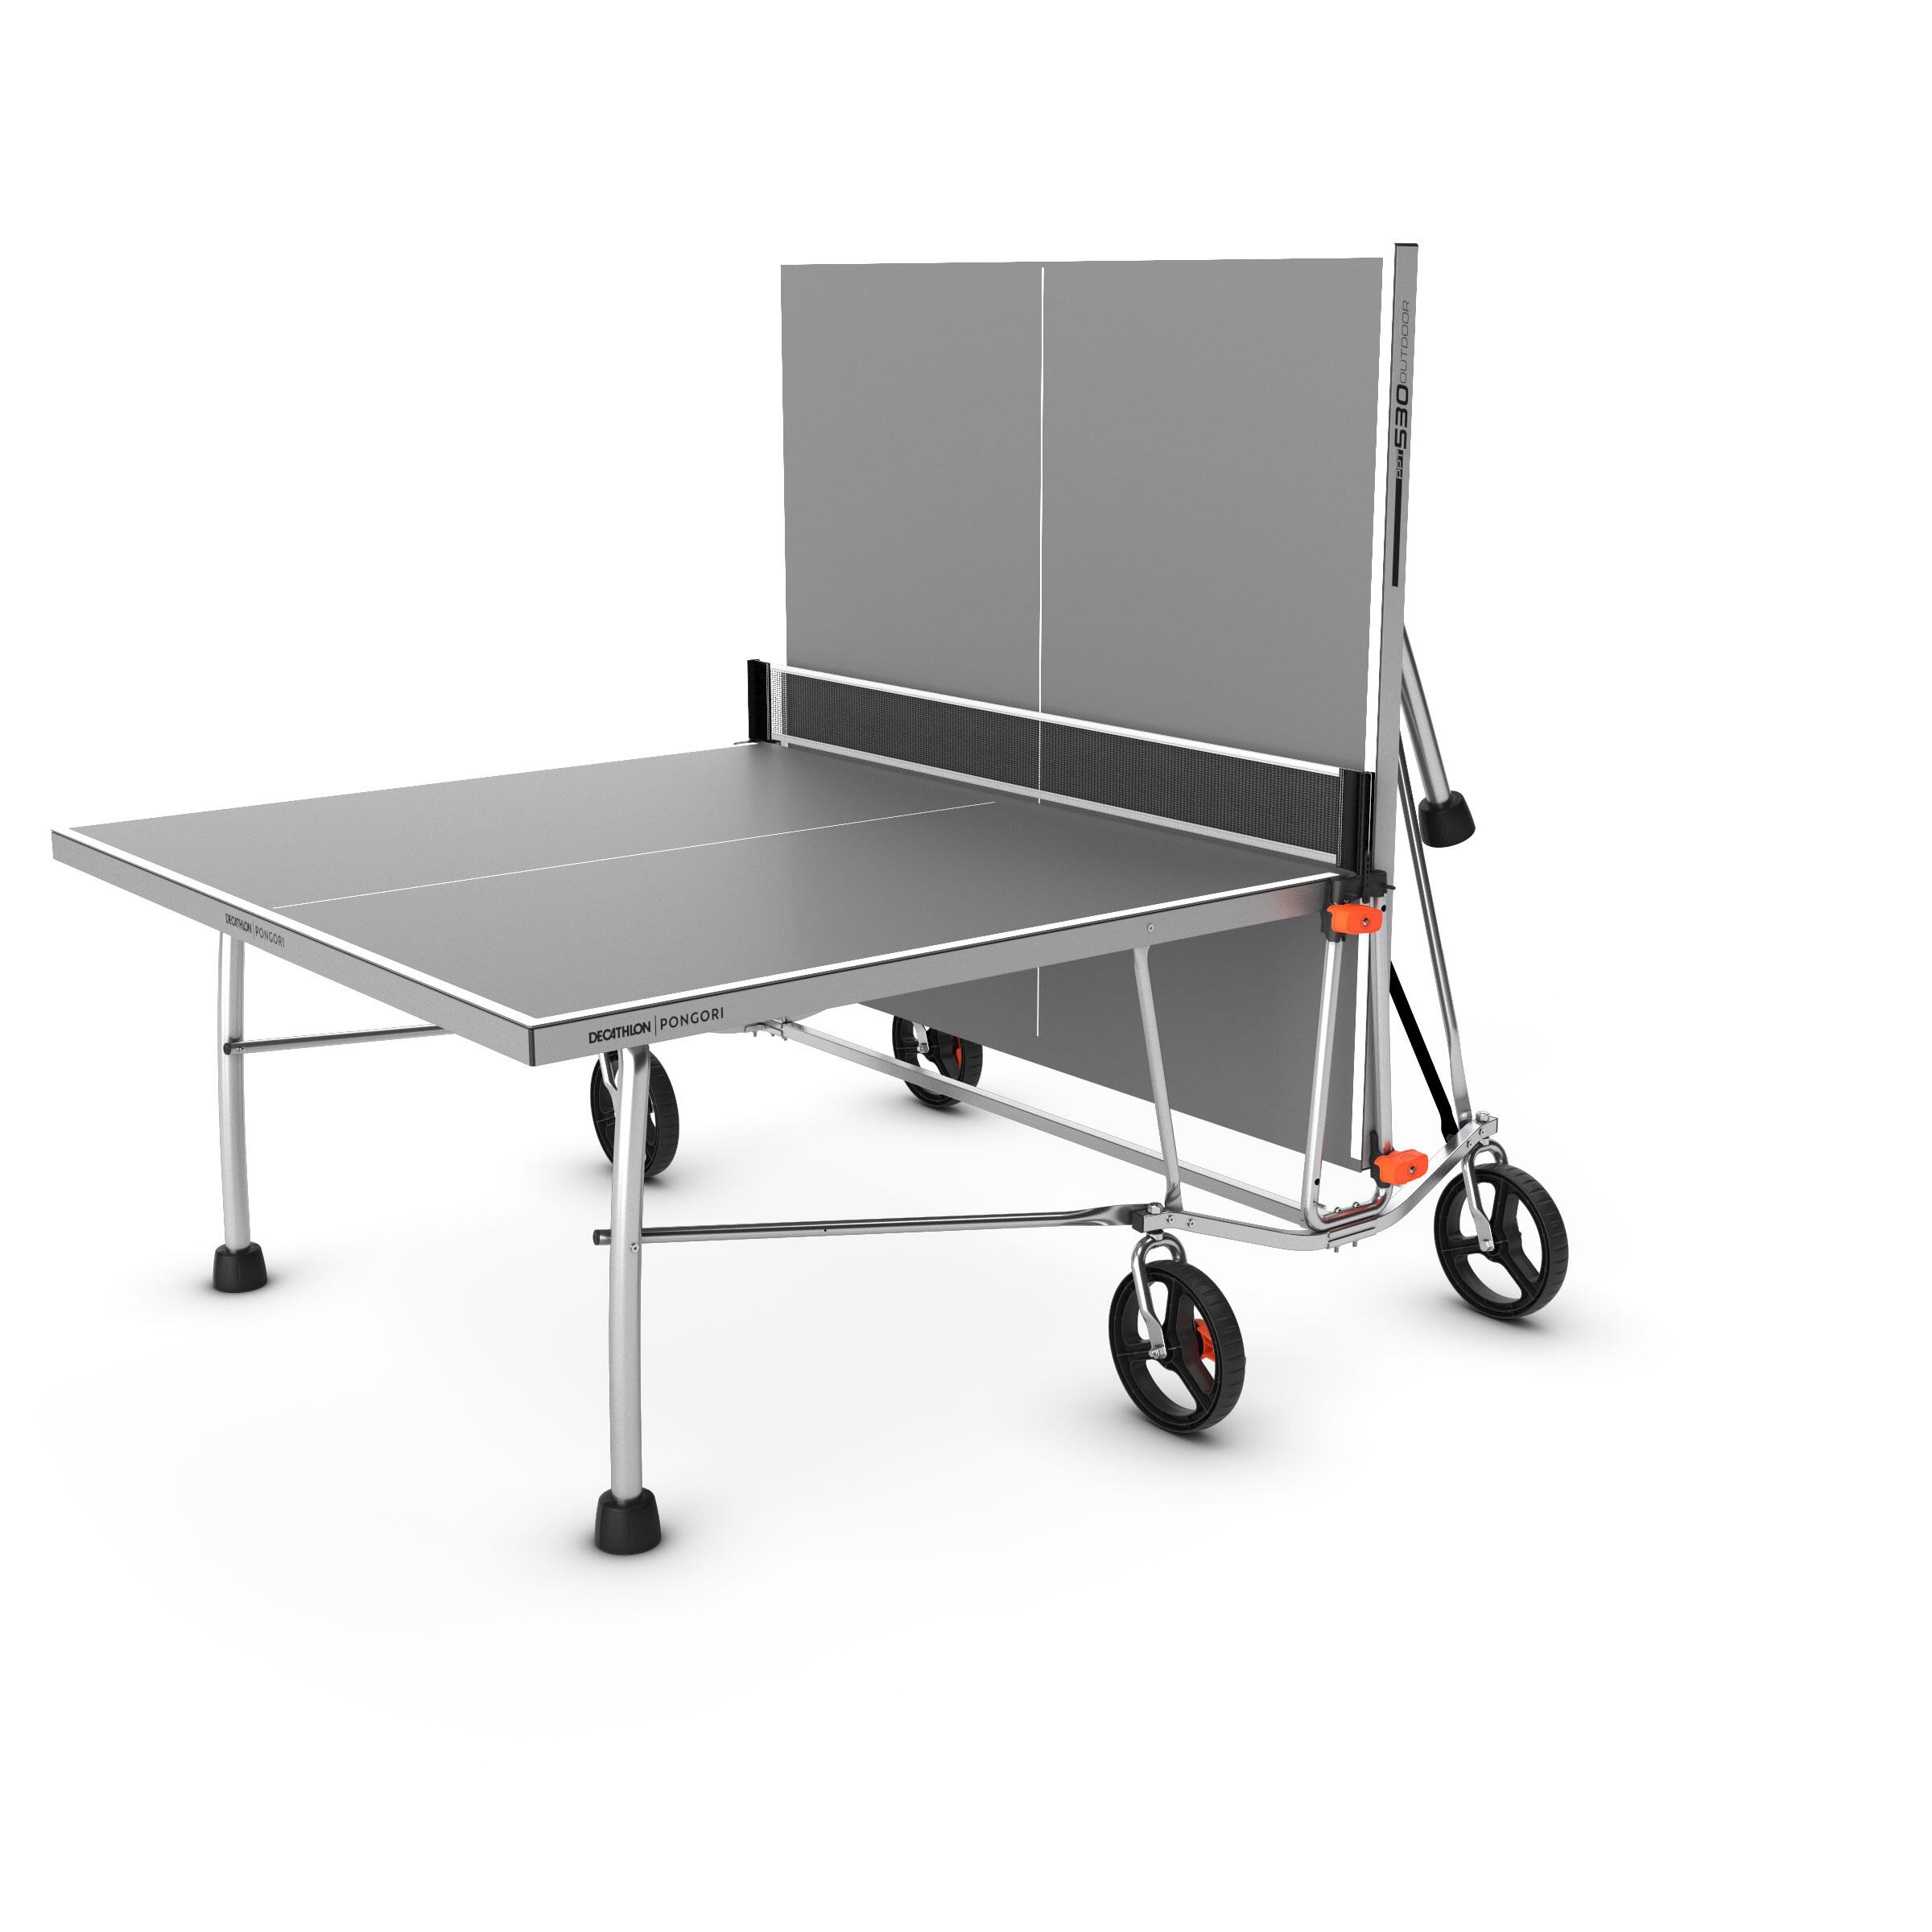 Outdoor Table Tennis Table PPT 530 